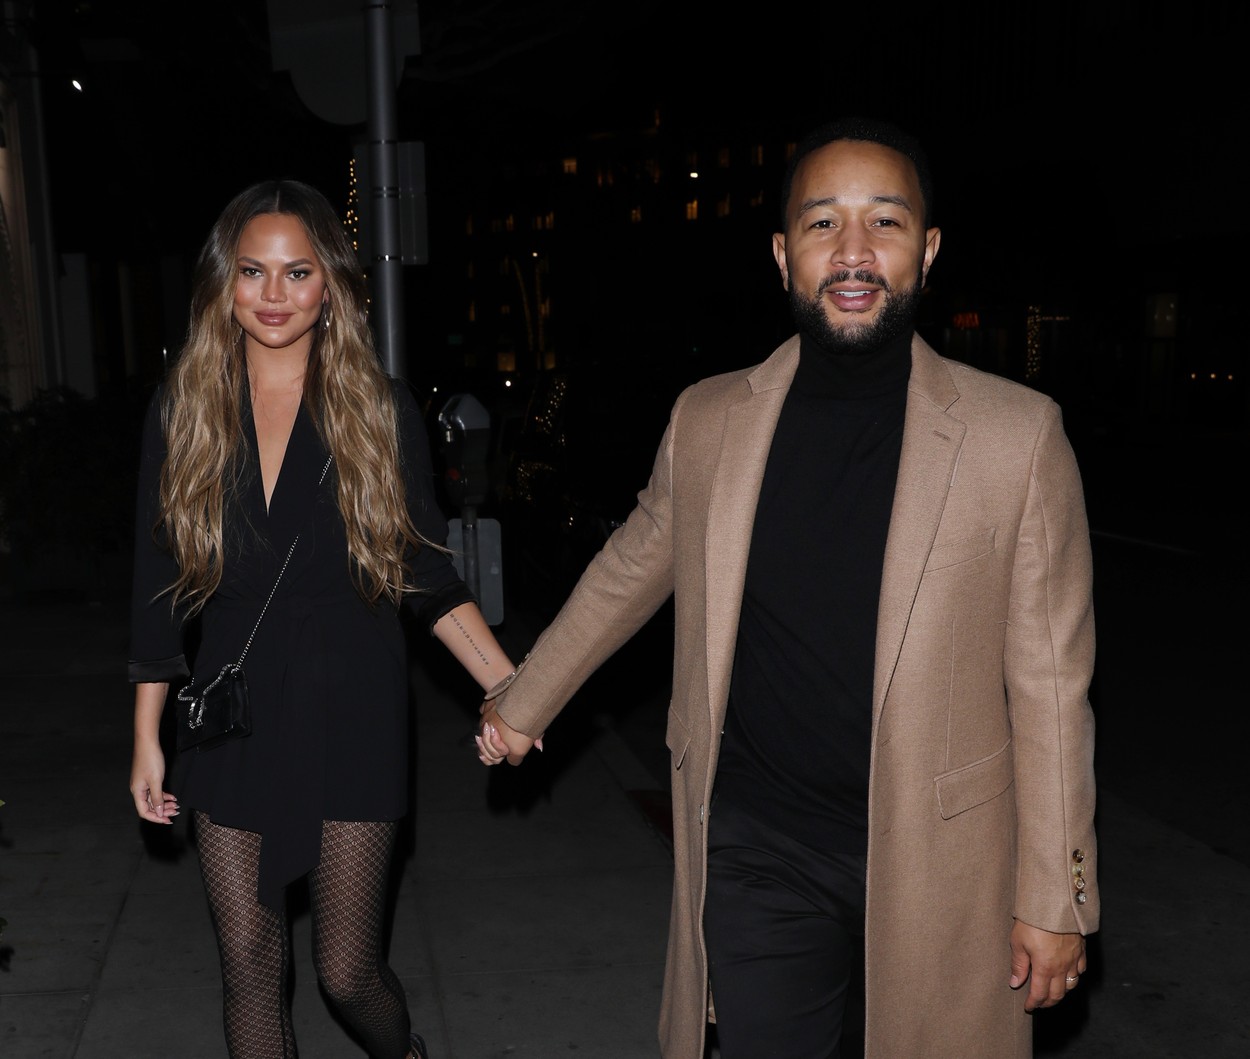 Chrissy Teigen and John Legend have a romantic dinner date at Madeo restaurant in Beverly Hills. The couple walked dined at the fine Italian restaurant for two hours.
27 Feb 2020, Image: 501579749, License: Rights-managed, Restrictions: World Rights, Model Release: no, Credit line: Photographer Group/MEGA / The Mega Agency / Profimedia